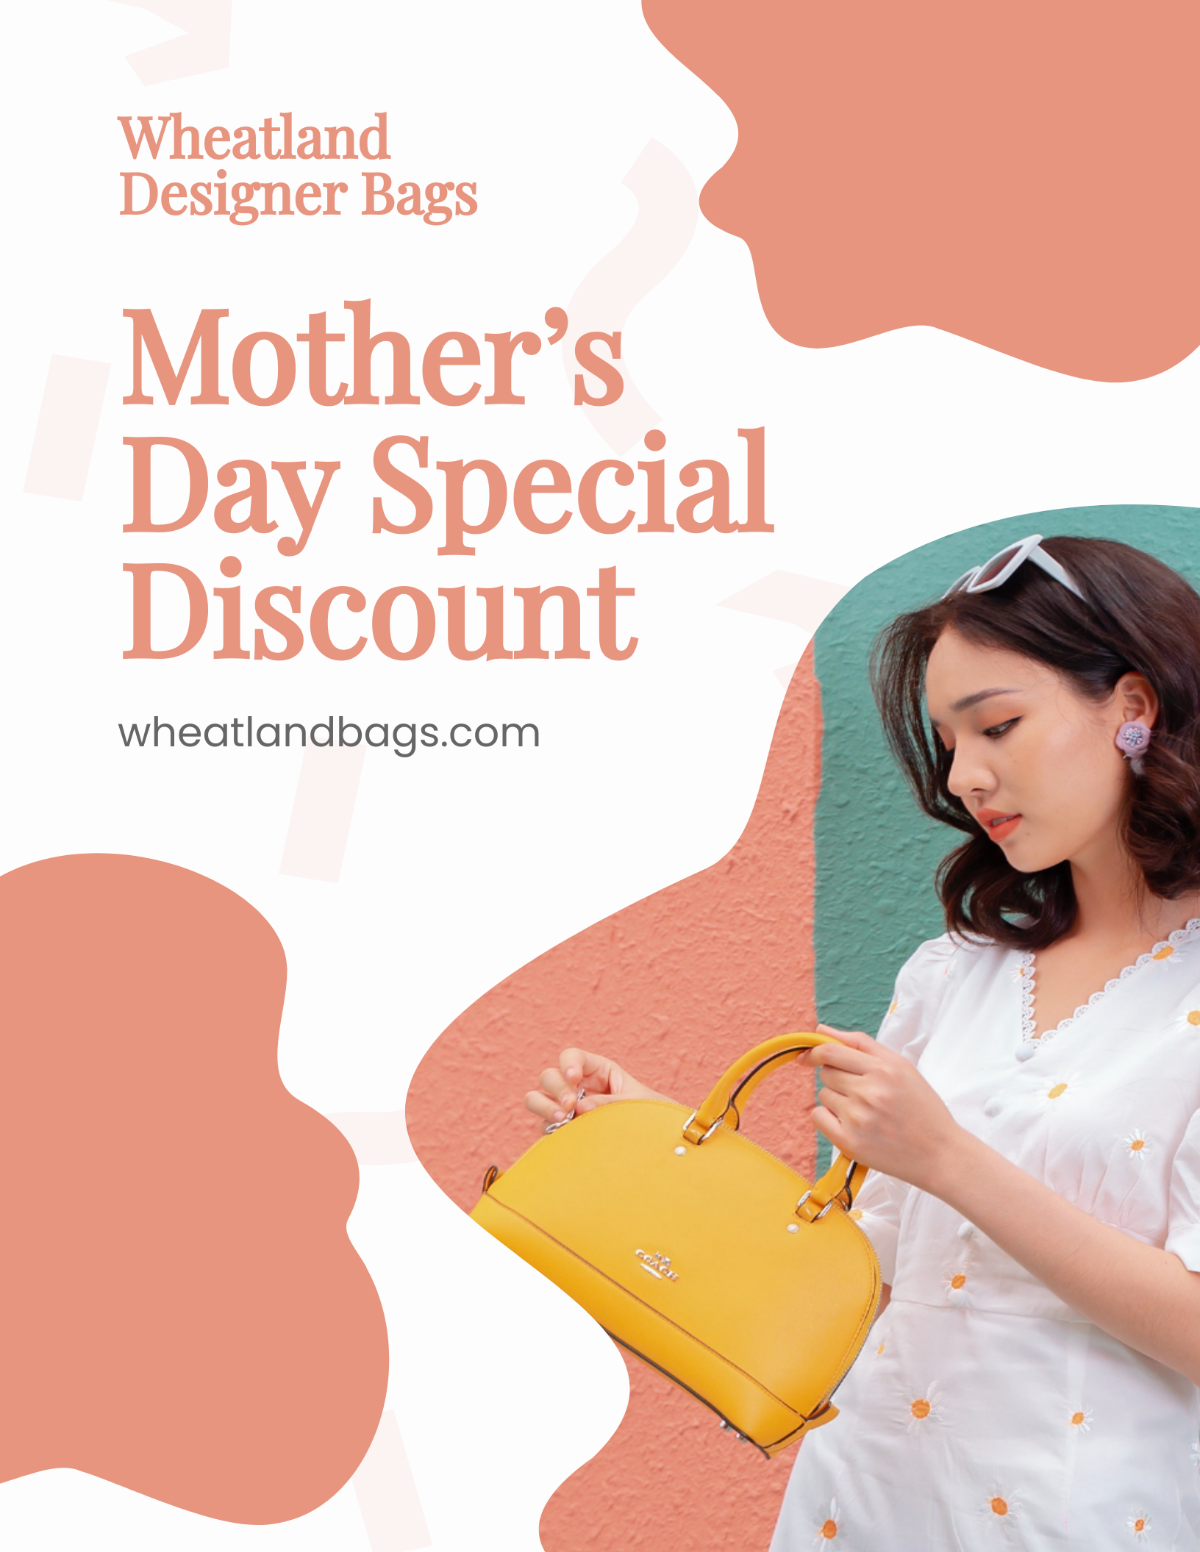 Mother's Day Discount Flyer Template